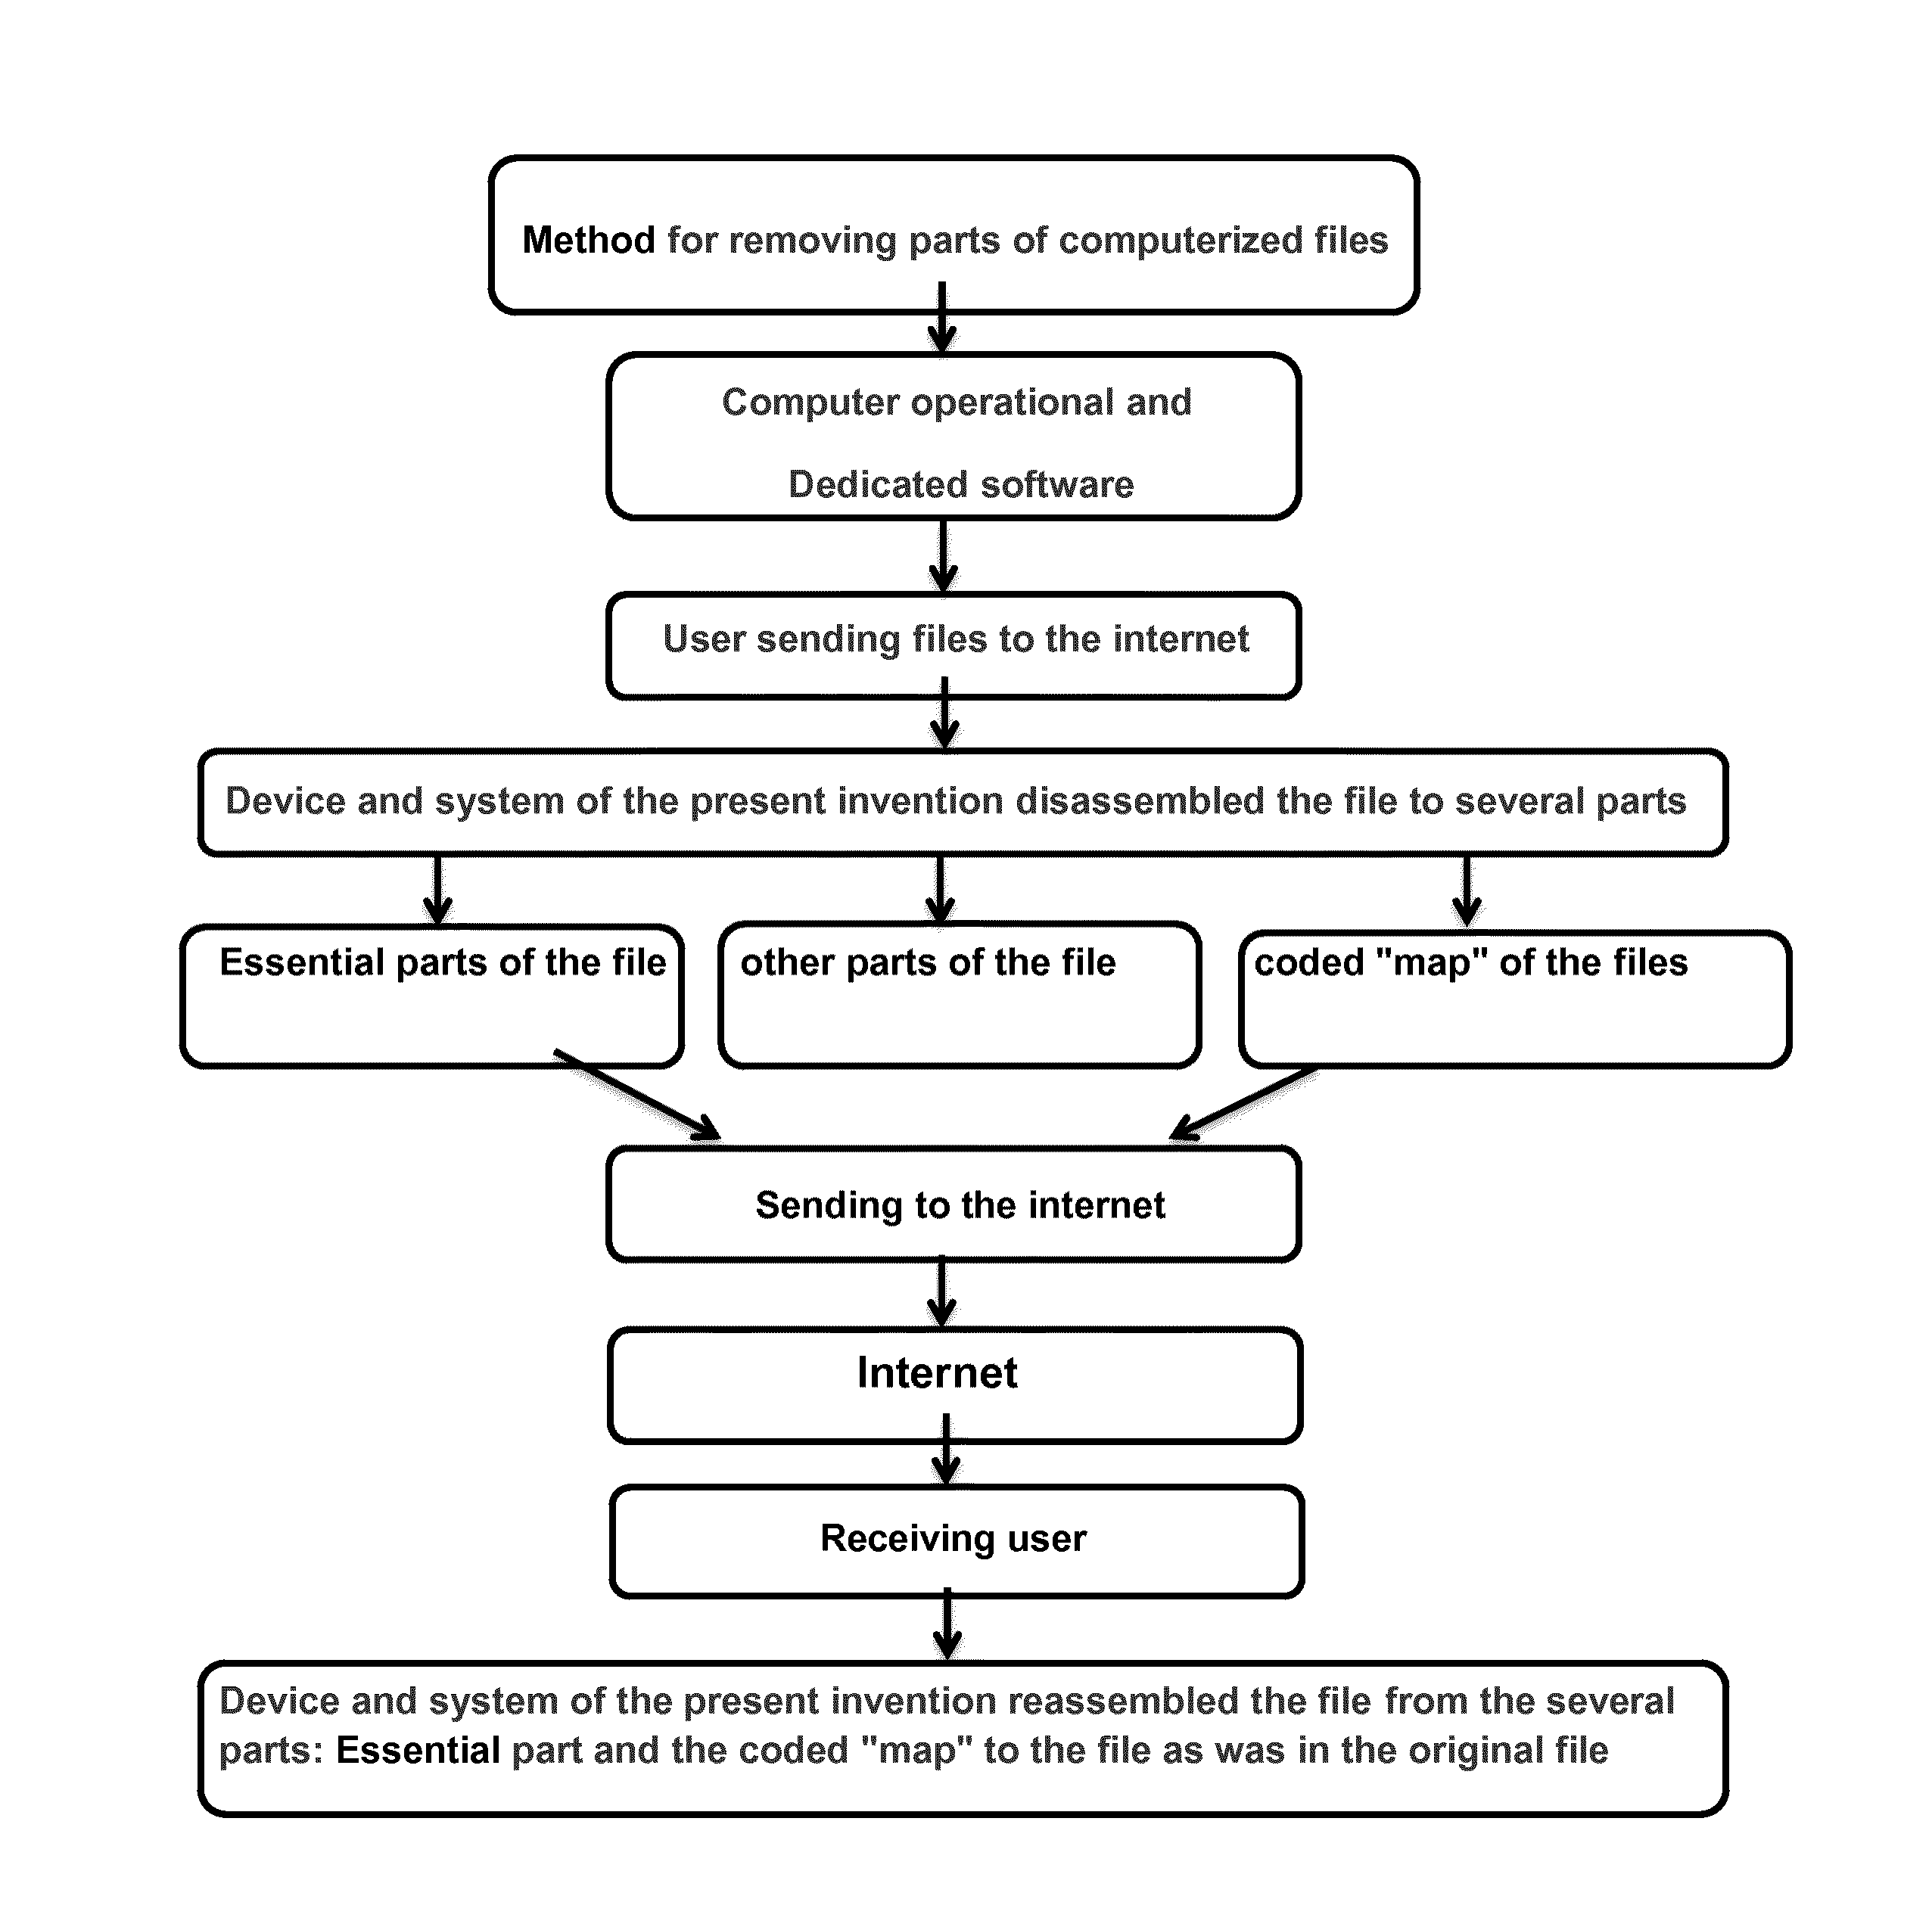 Method system and device for removing parts of computerized files that are sending through the internet and assembling them back at the receiving computer unit